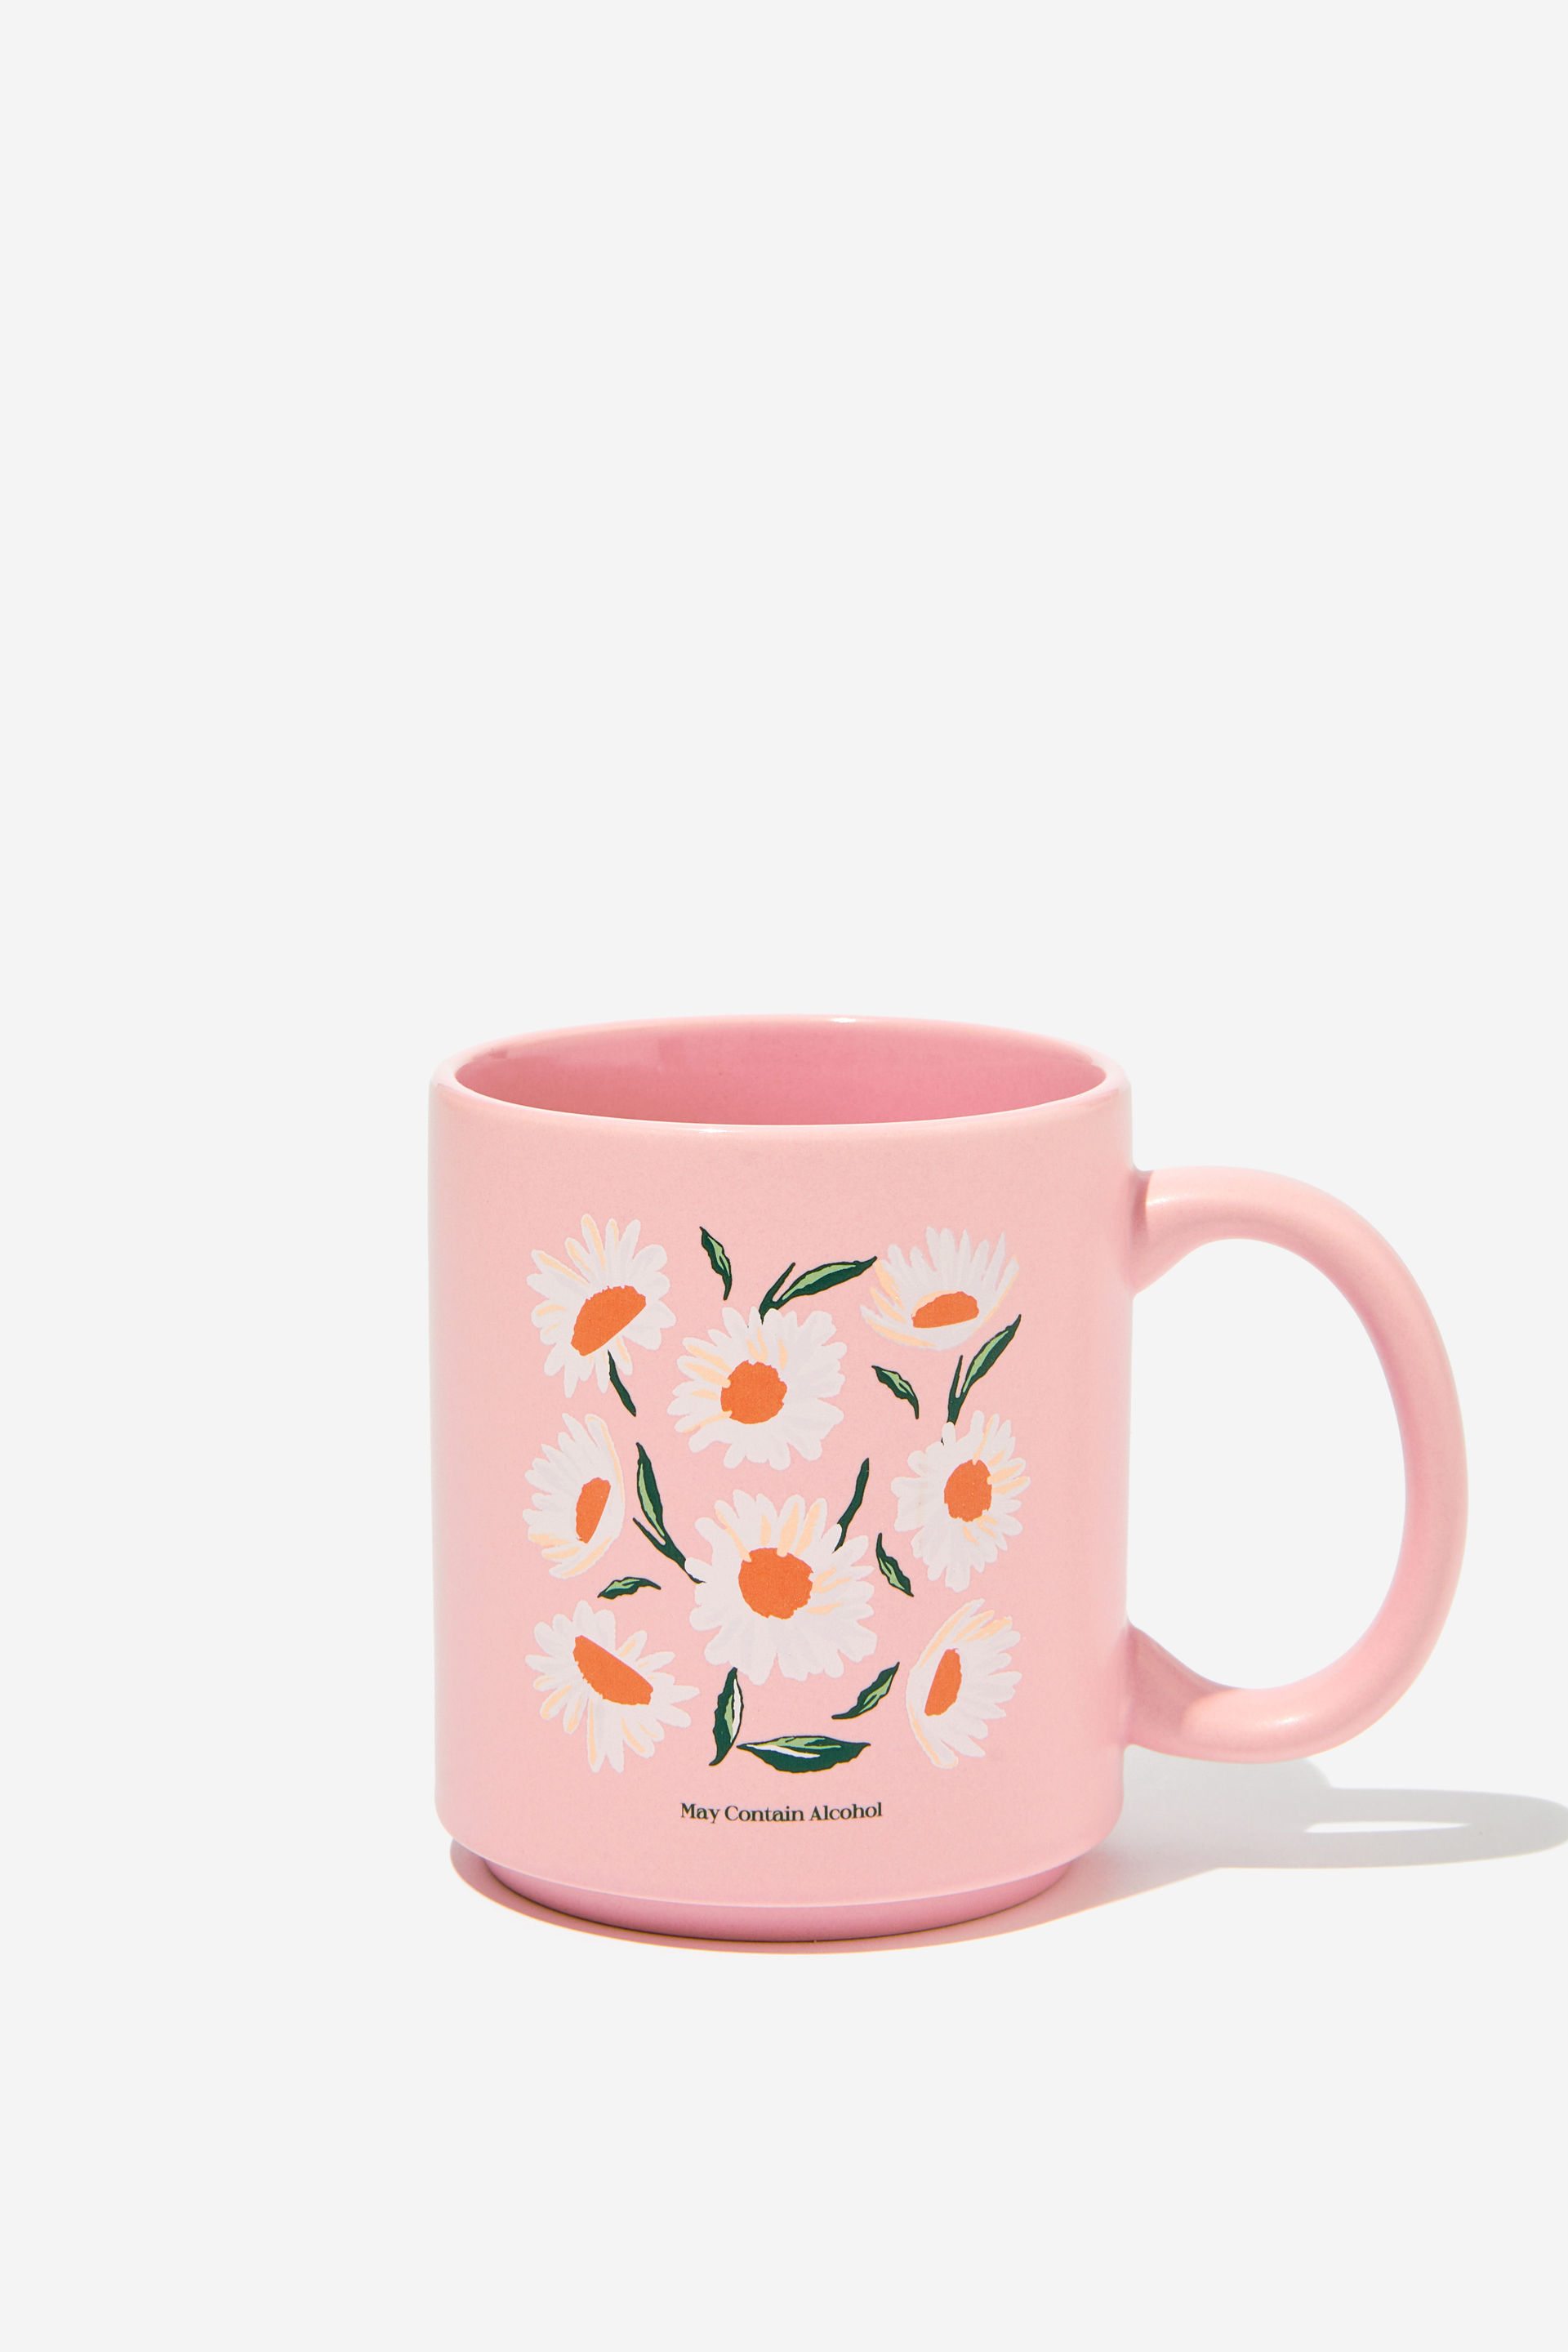 Typo - Daily Mug - May contain alcohol flowers!